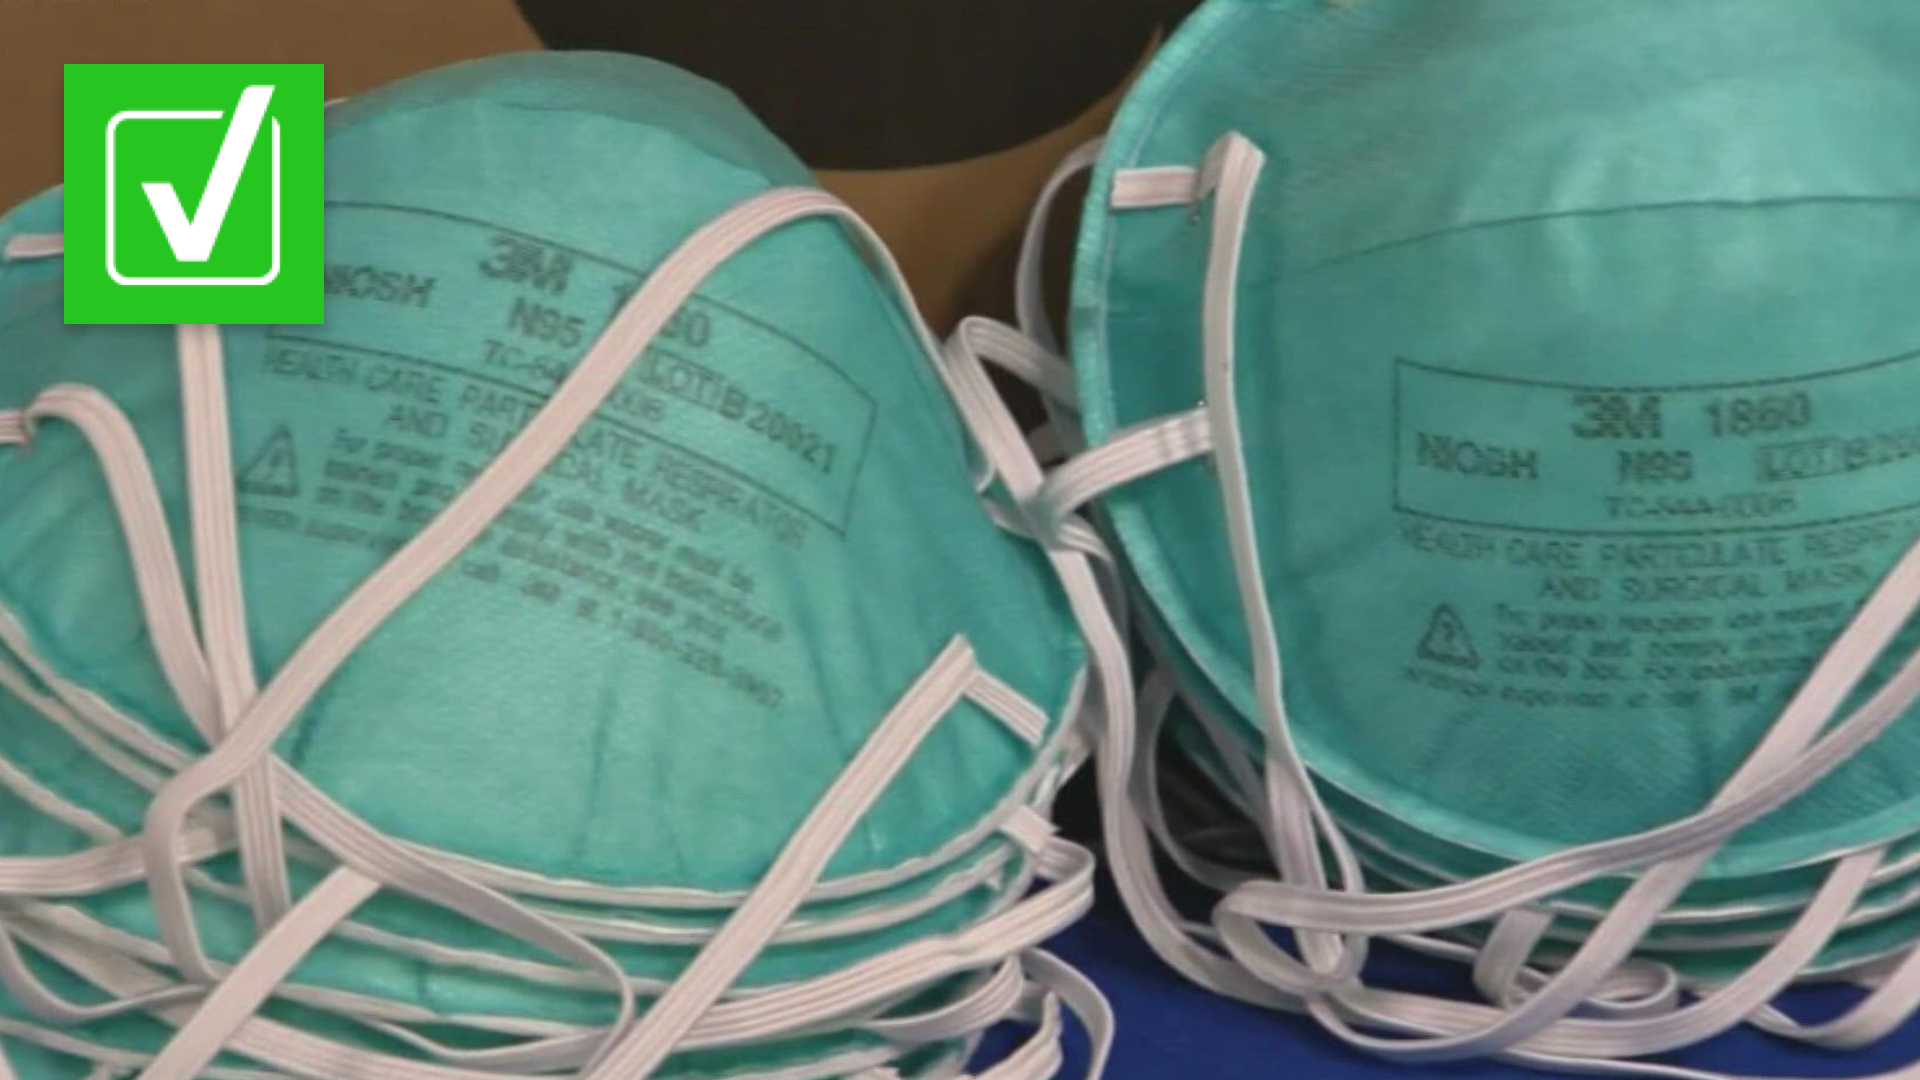 KN95 and surgical-grade masks are only available at some public libraries at this time, with more locations added soon, according to the state.